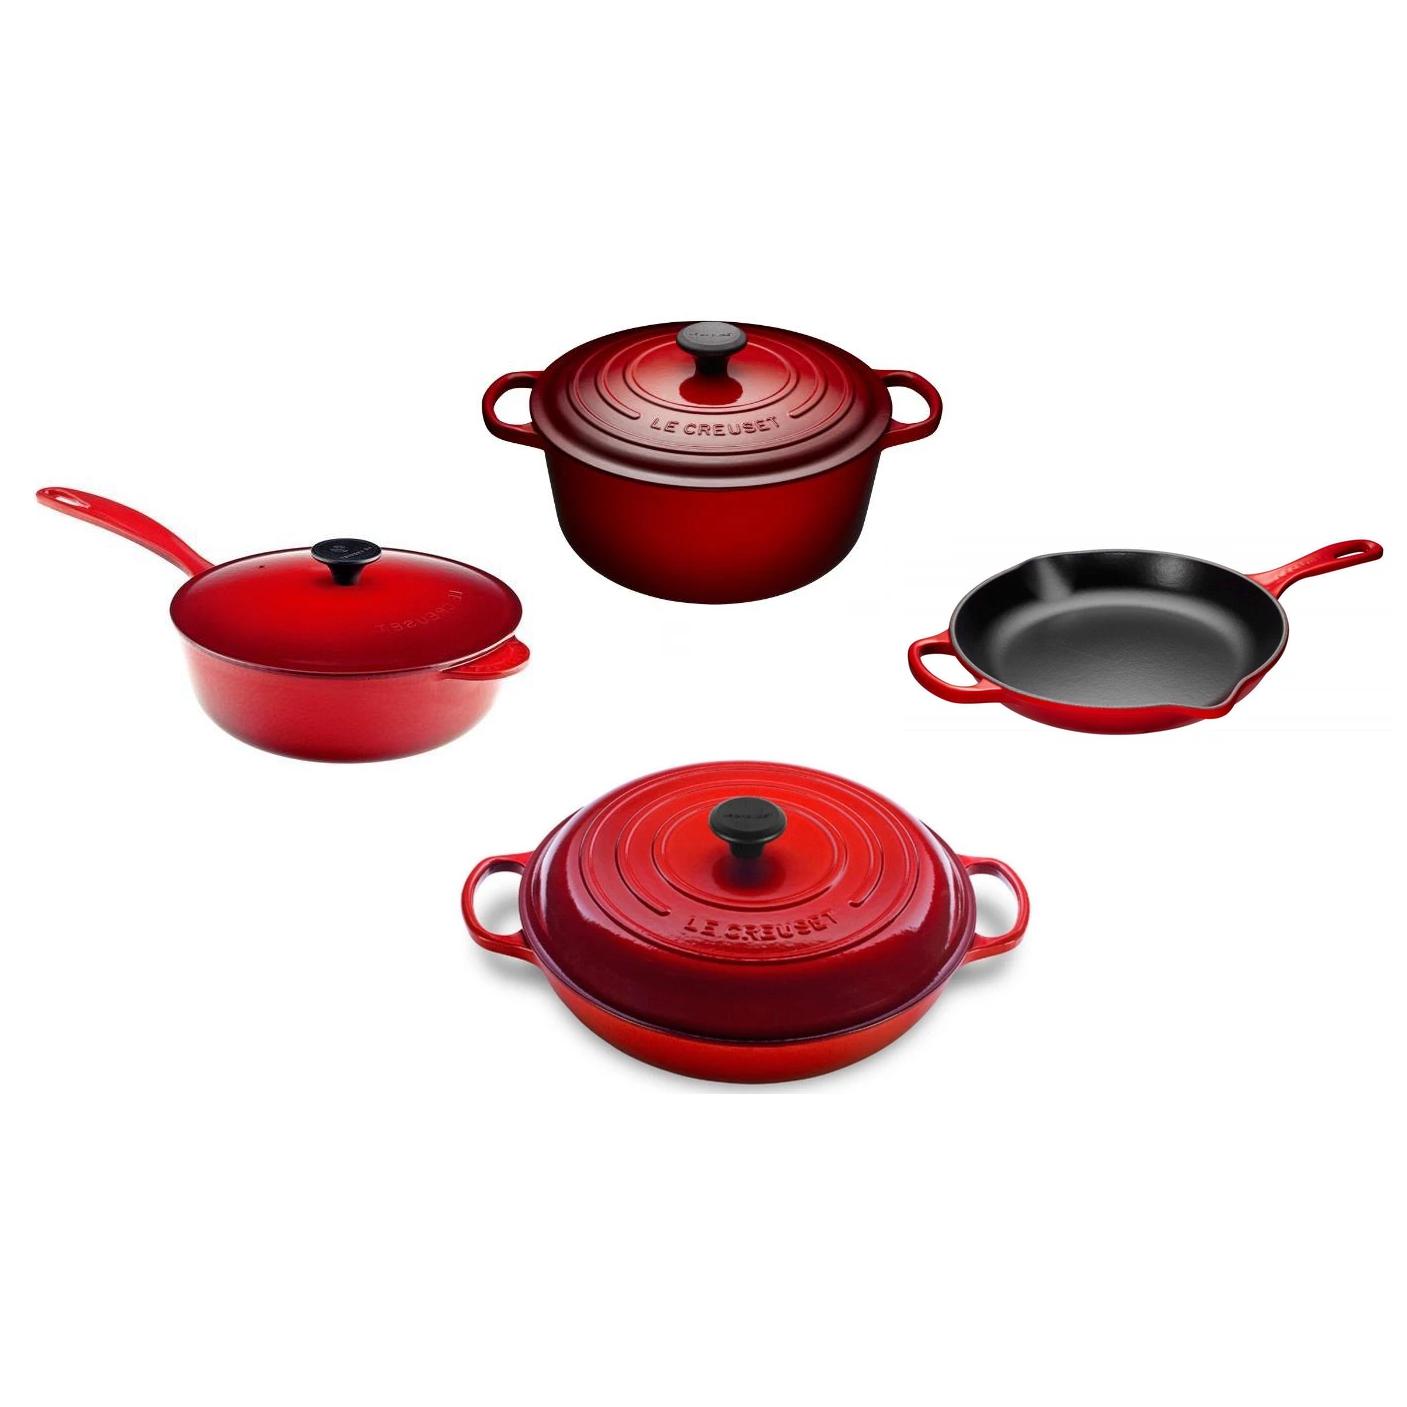 Le Chef 21 Piece Enameled Cast Iron Cookware Set in Cherry